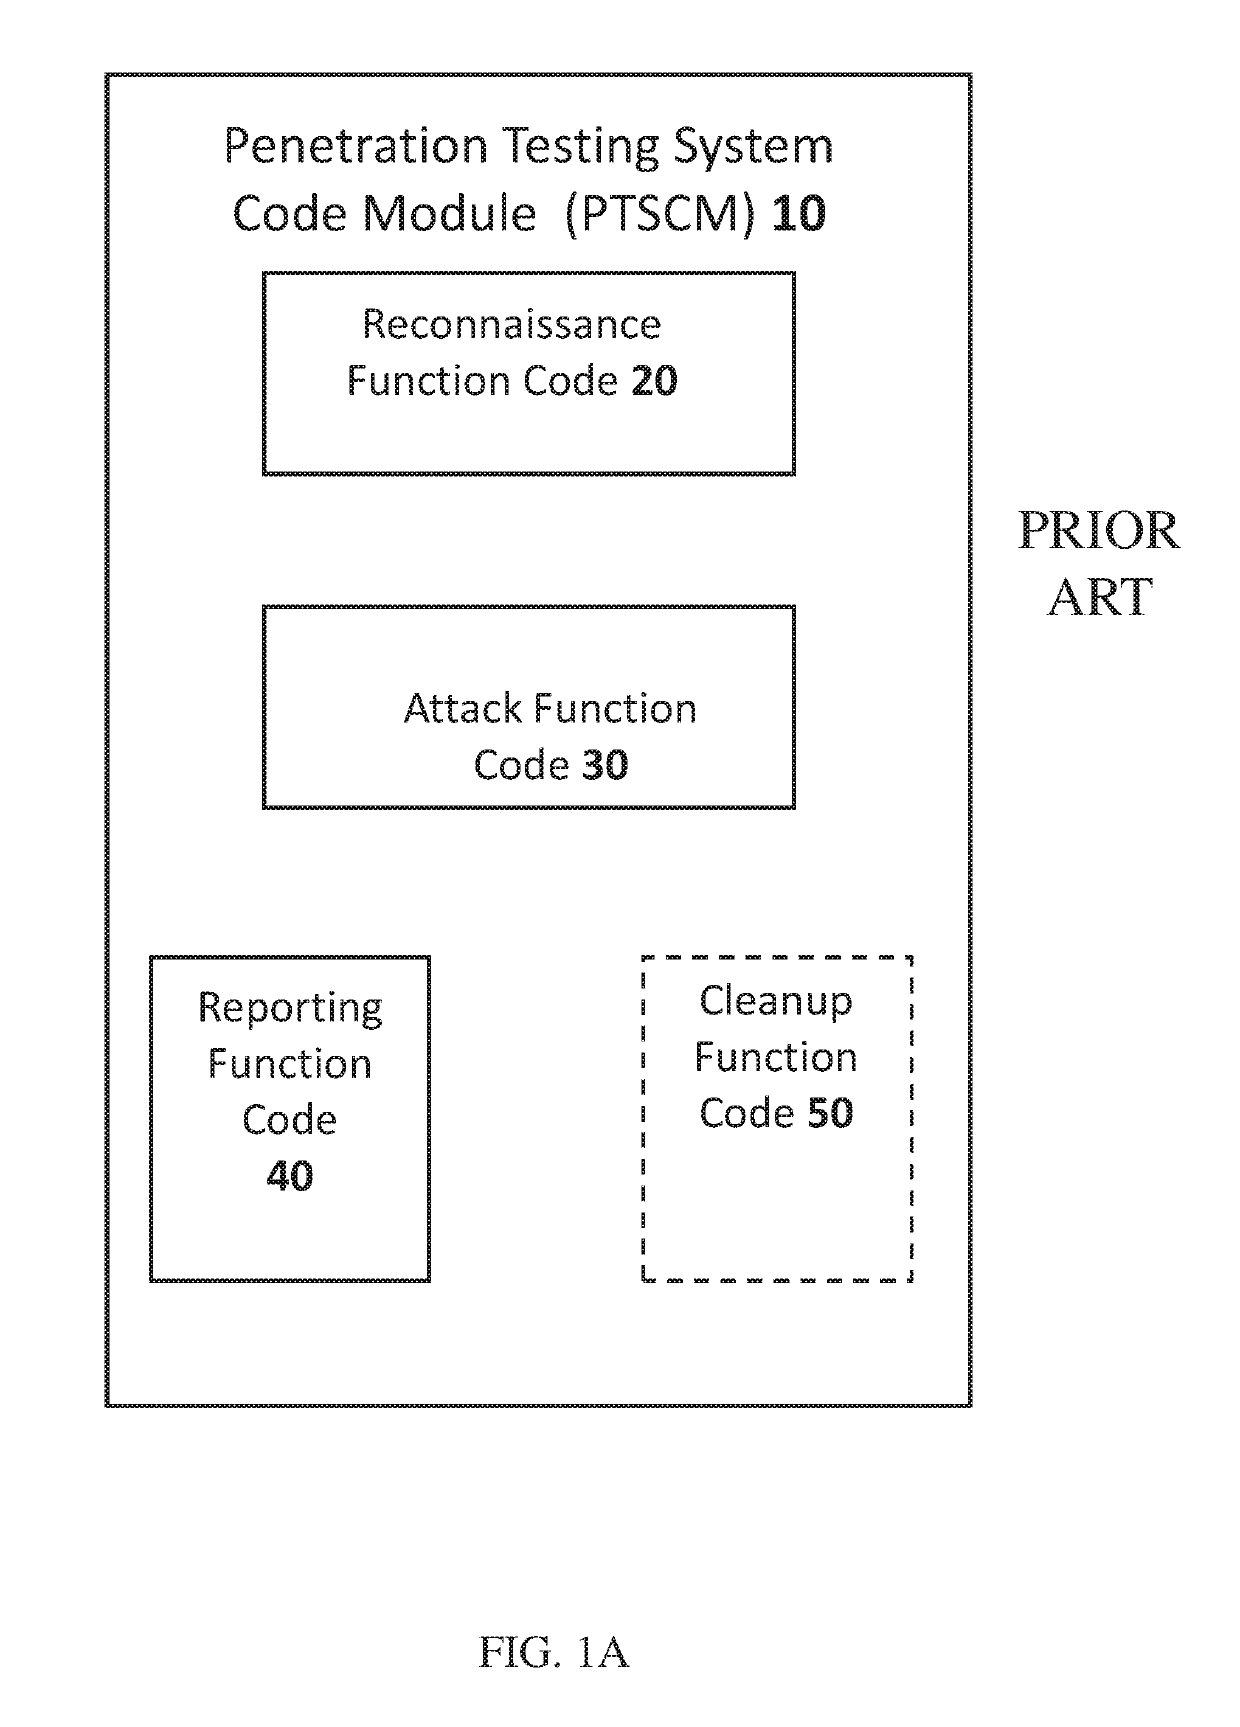 Systems and methods for determining optimal remediation recommendations in penetration testing